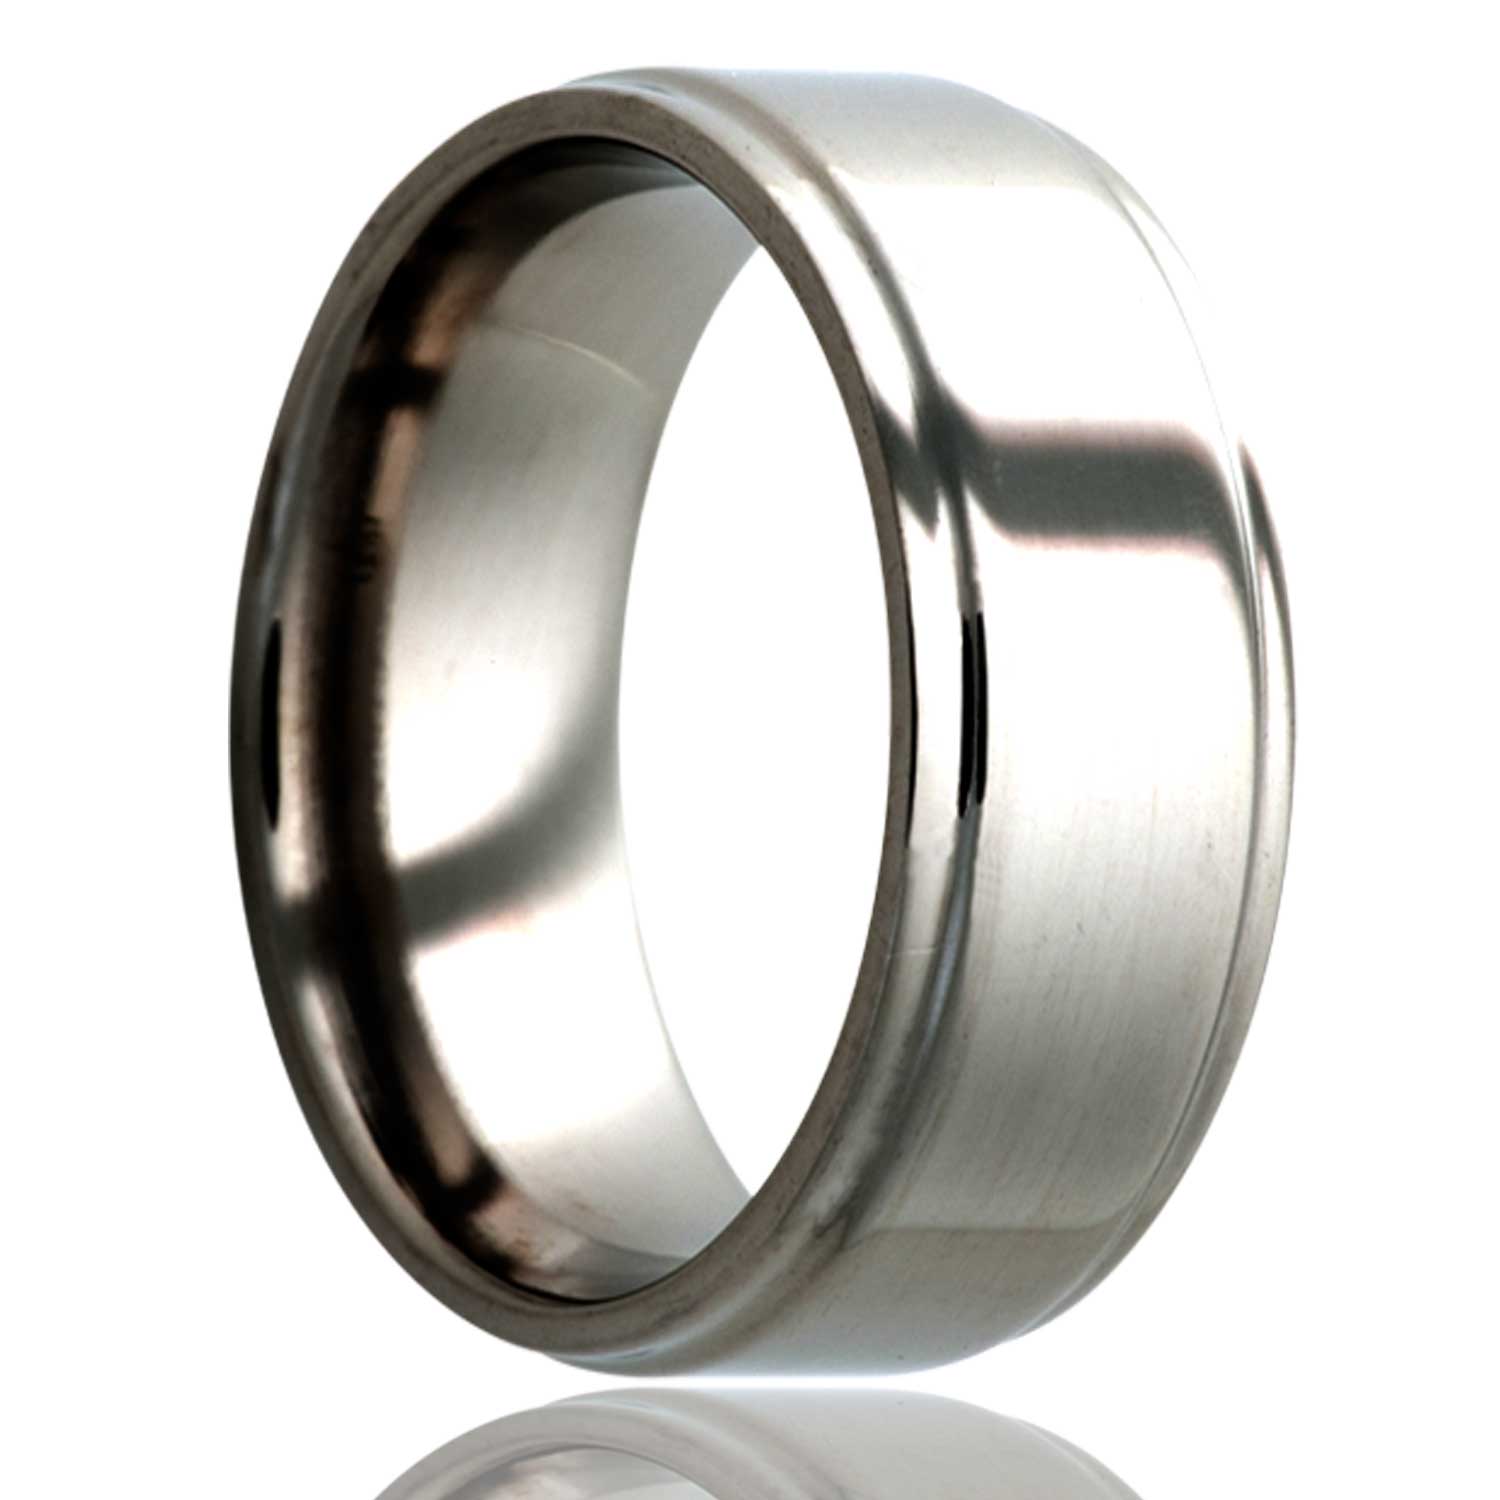 A titanium wedding band with polished stepped edges displayed on a neutral white background.